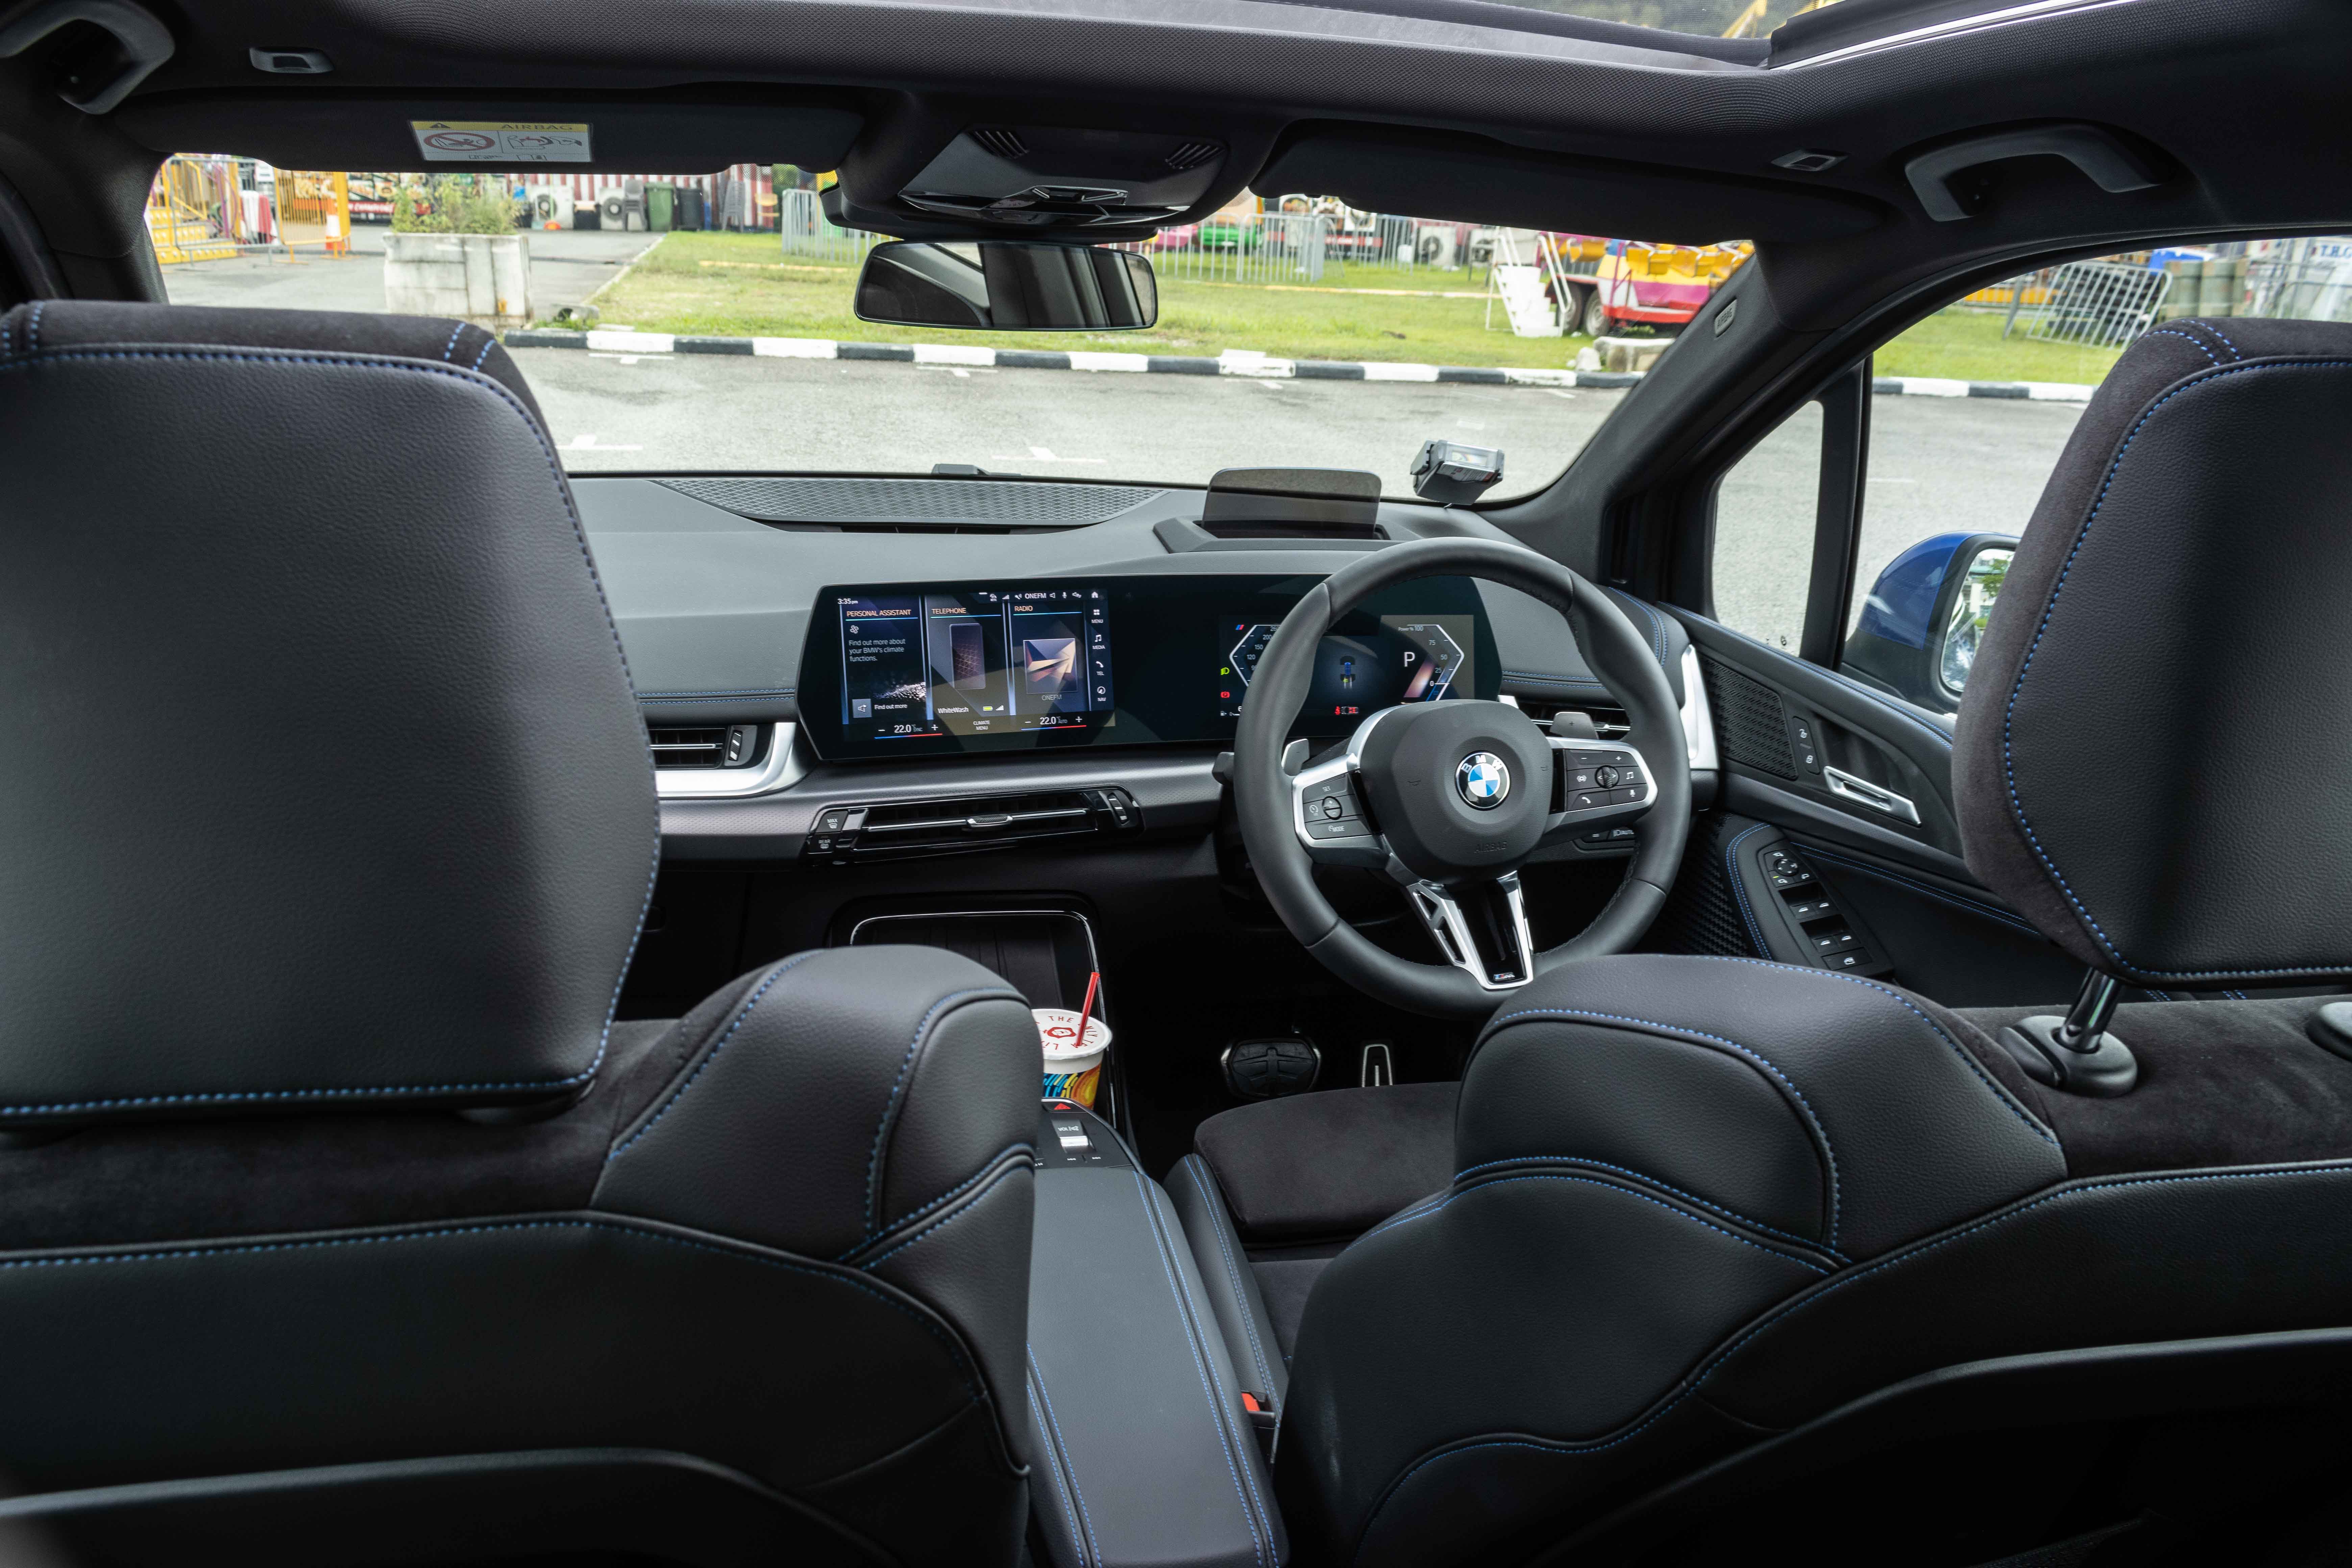 BMW 218i Active Tourer M Sport Singapore - View from the "are we there yet" seat